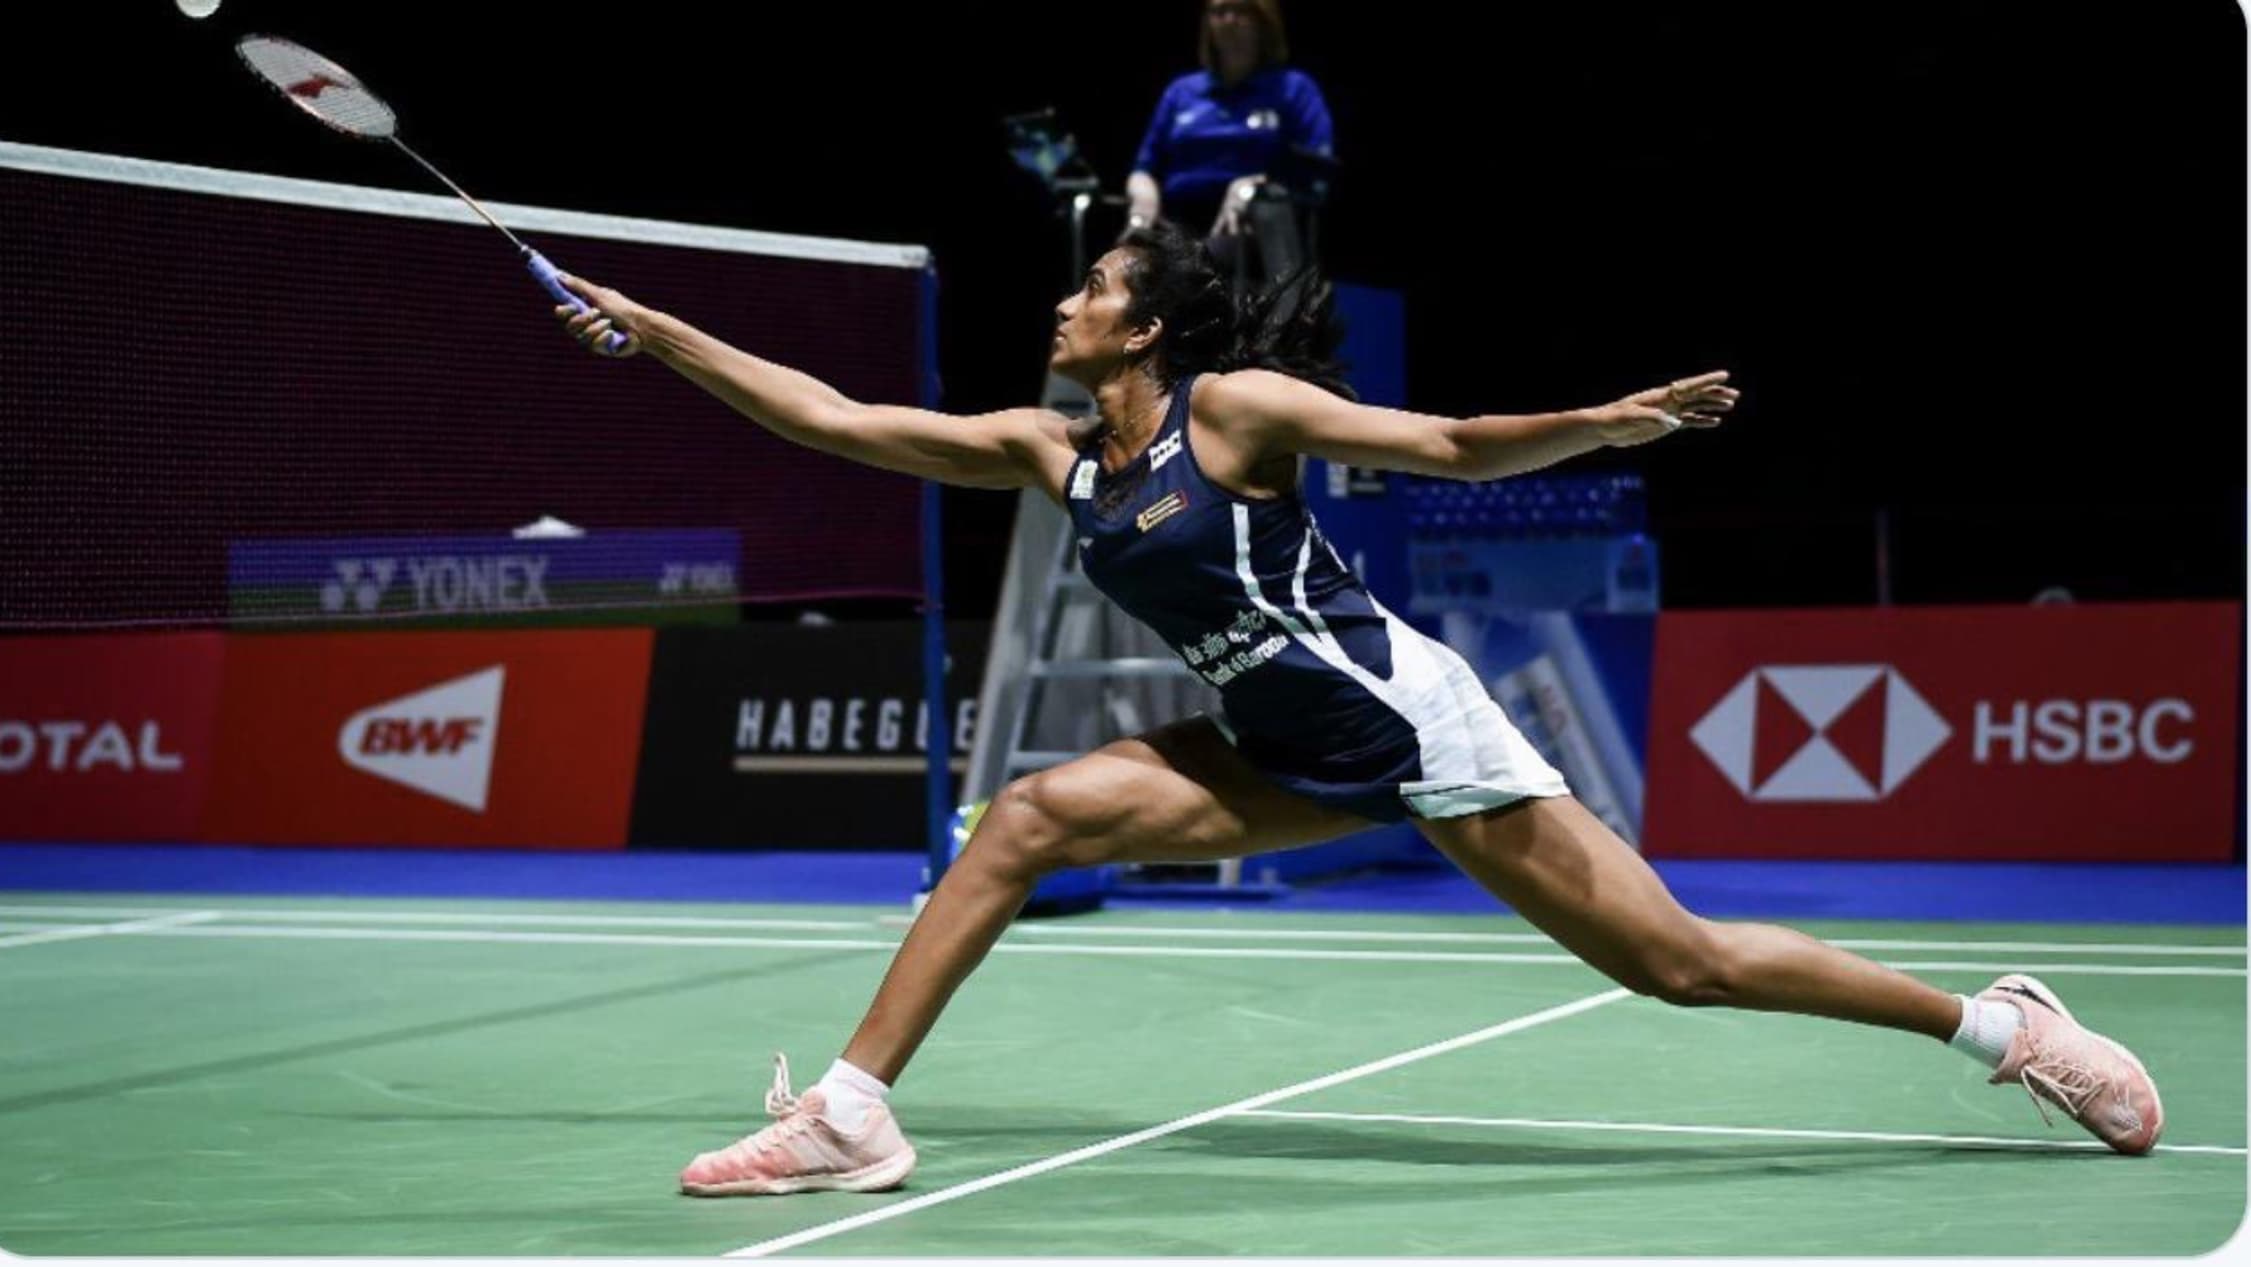 PV Sindhu loses in semi-final at French Open 2021